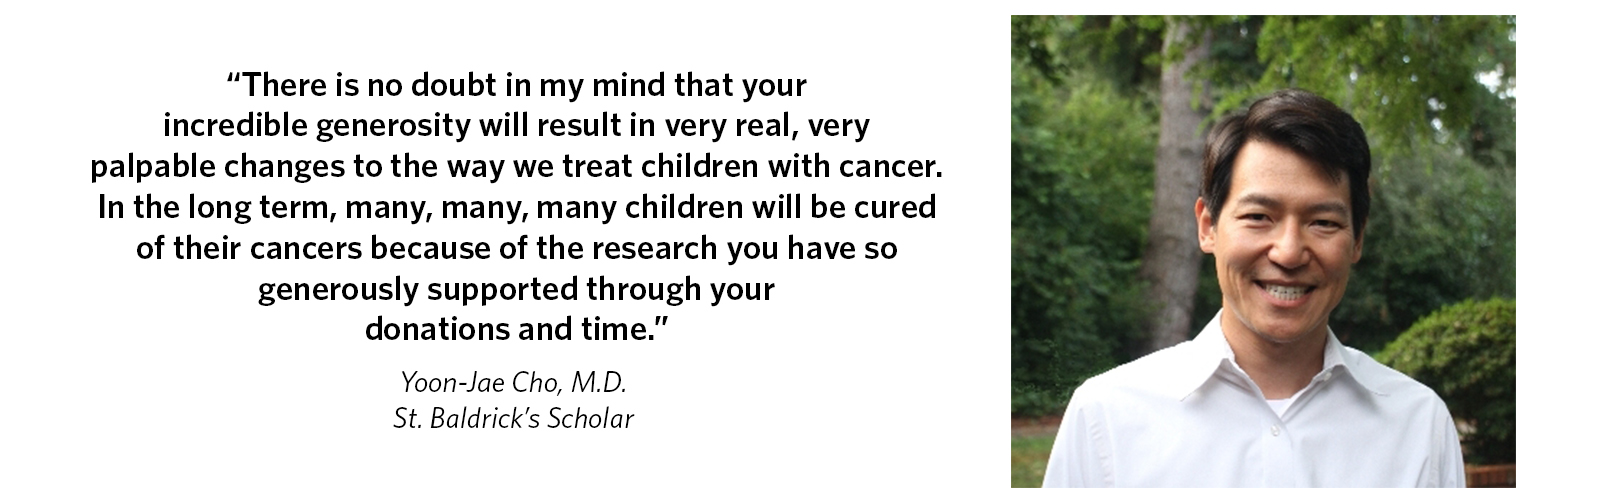 'There is no doubt in my mind that your incredible generosity will result in very real, very palpable changes to the way we treat children with cancer. In the long term many, many, many children will be cured of their cancers because of the research you have so generously supported through your donations and time.' Yoon-Jae Cho, M.D., St. Baldrick's Scholar